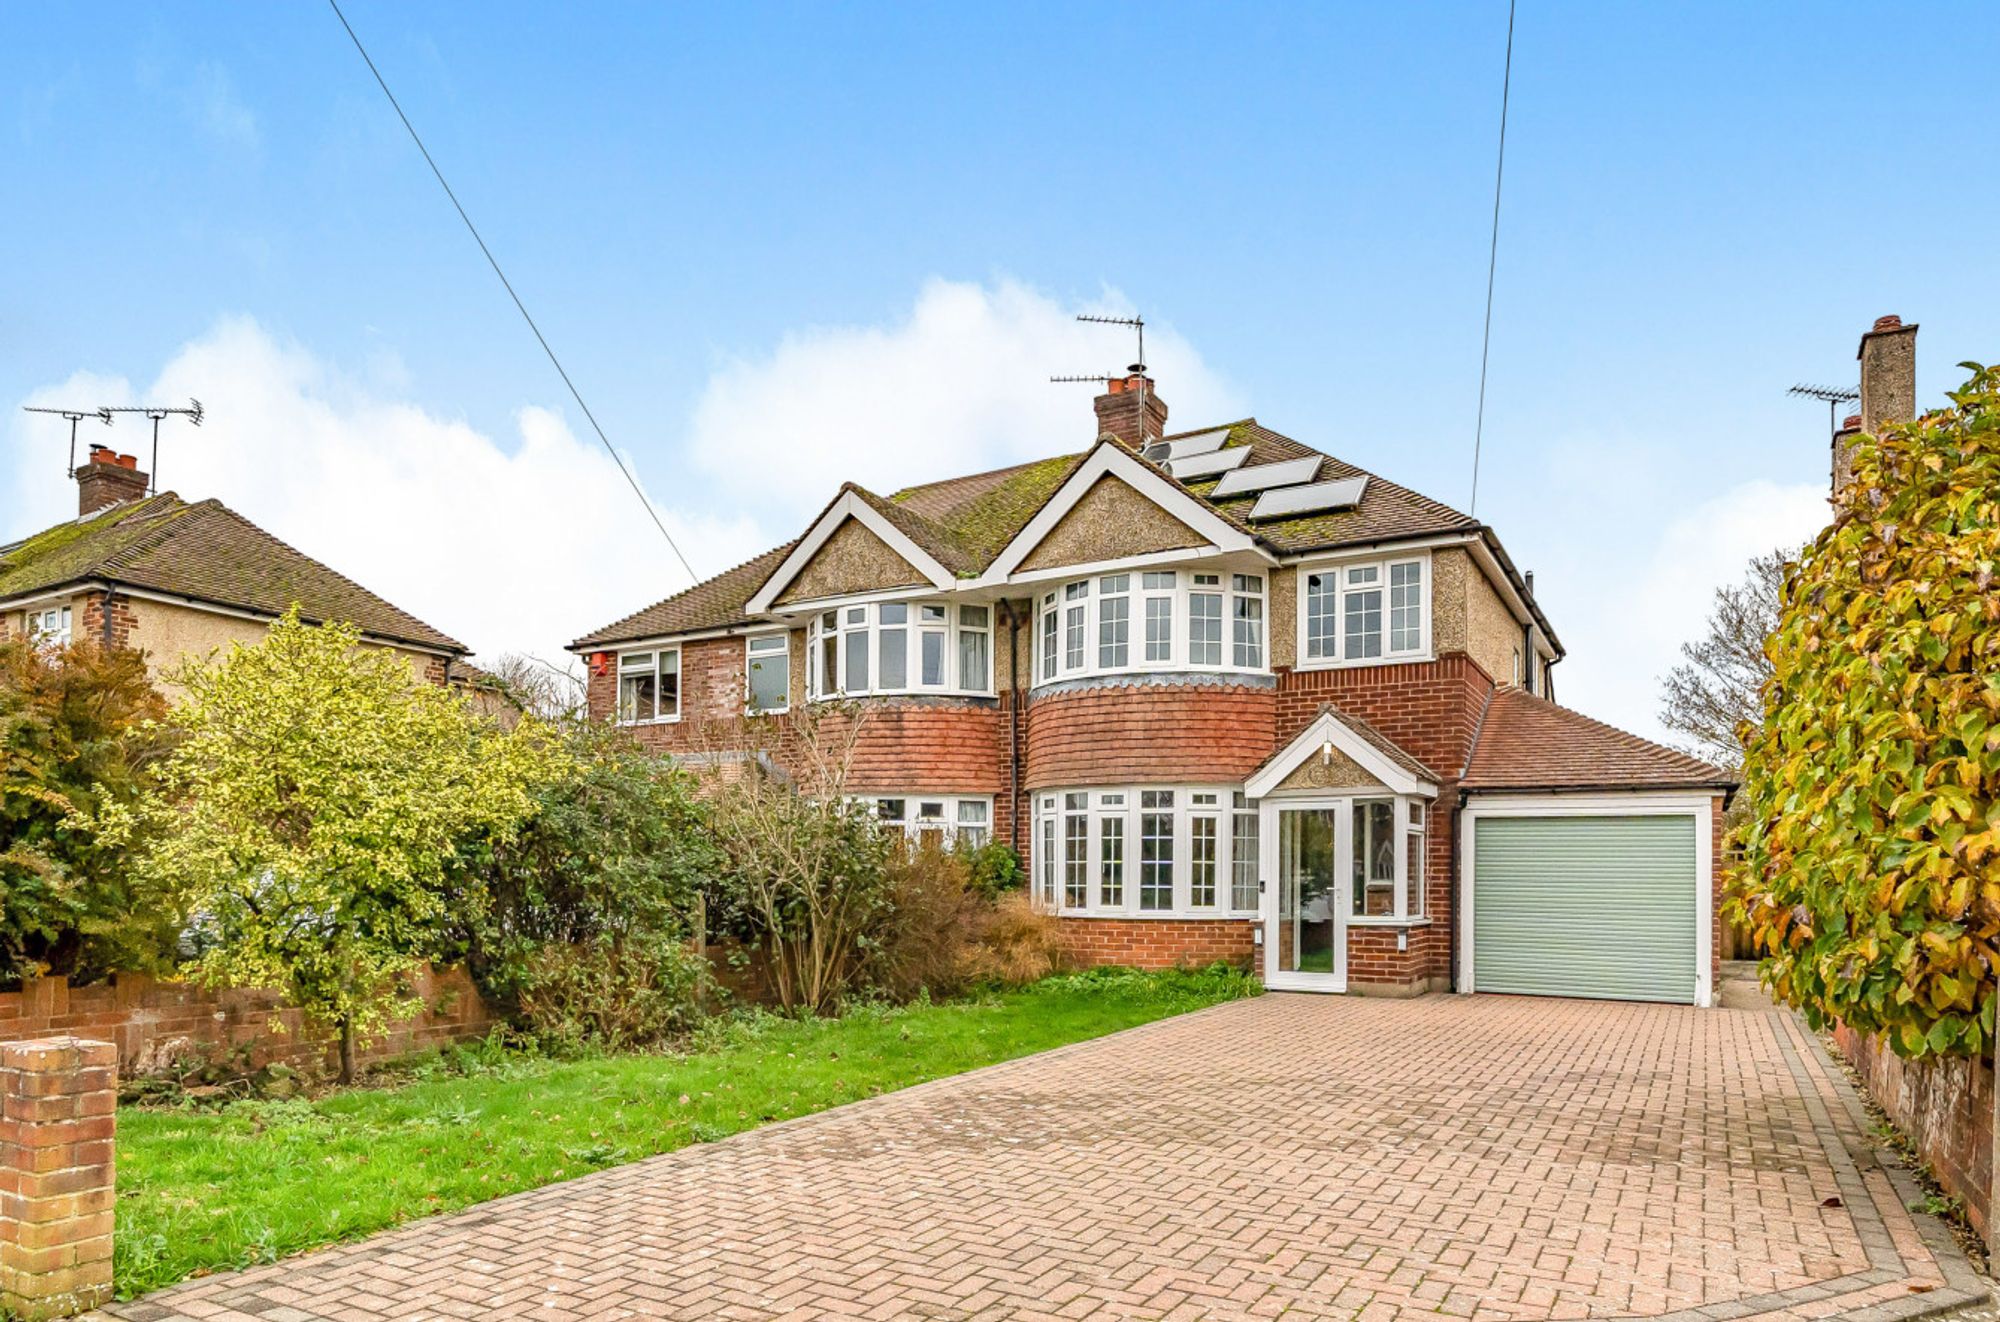 Willowbed Drive, Chichester, PO19